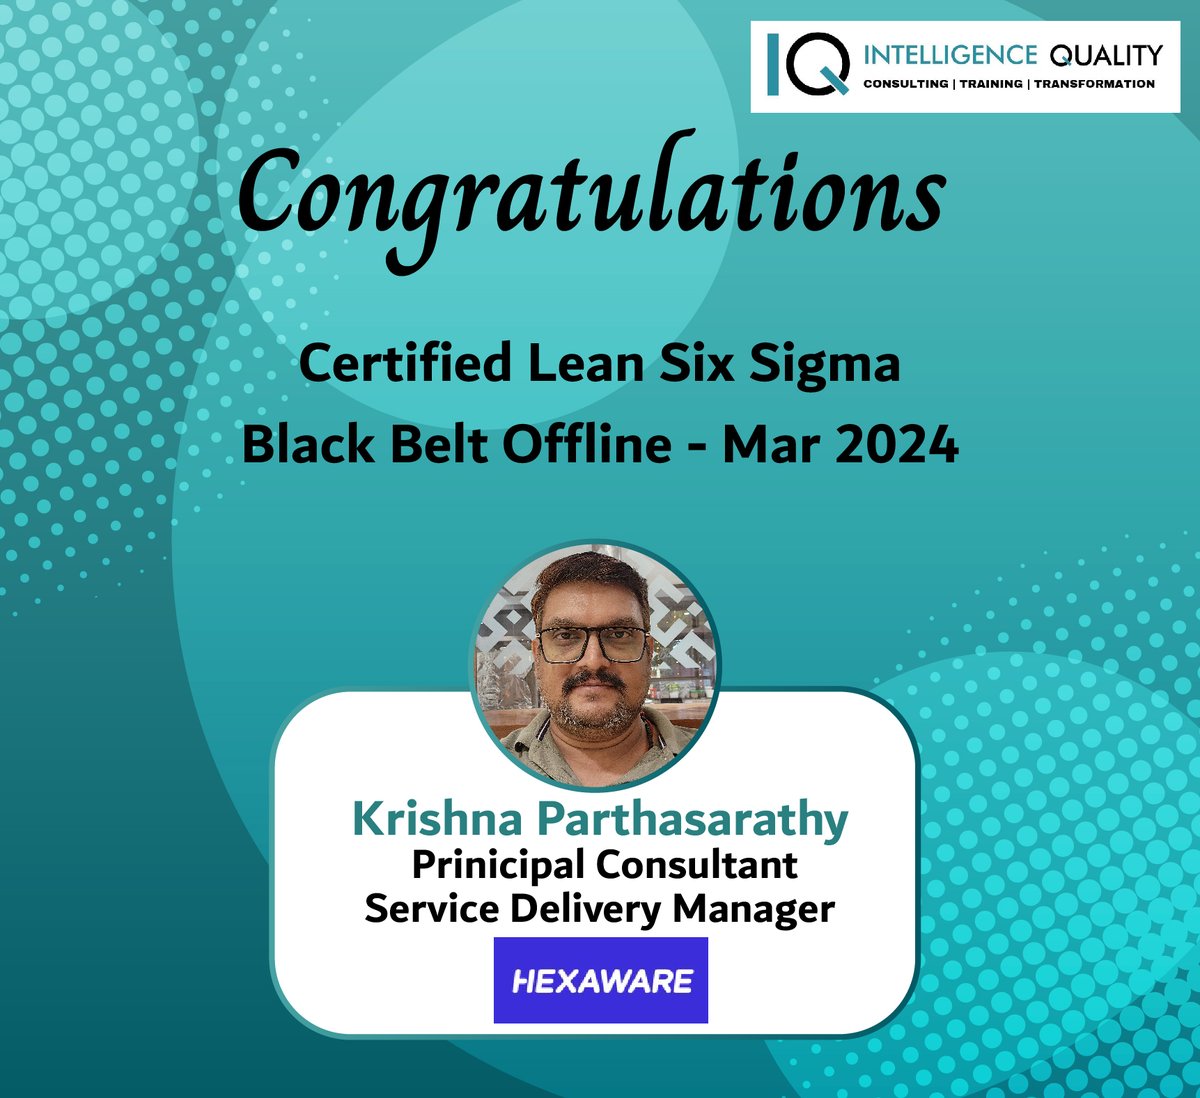 Join BB Batch by expressing your interest at lnkd.in/gSgs9N_D.              
Intelligence Quality would like to congratulate Mr. Krishna Parthasarathyon their completion of the Lean Six Sigma certification.       #leansixsigma #leansixsigmagreenbelt #leansixsigmablackbelt